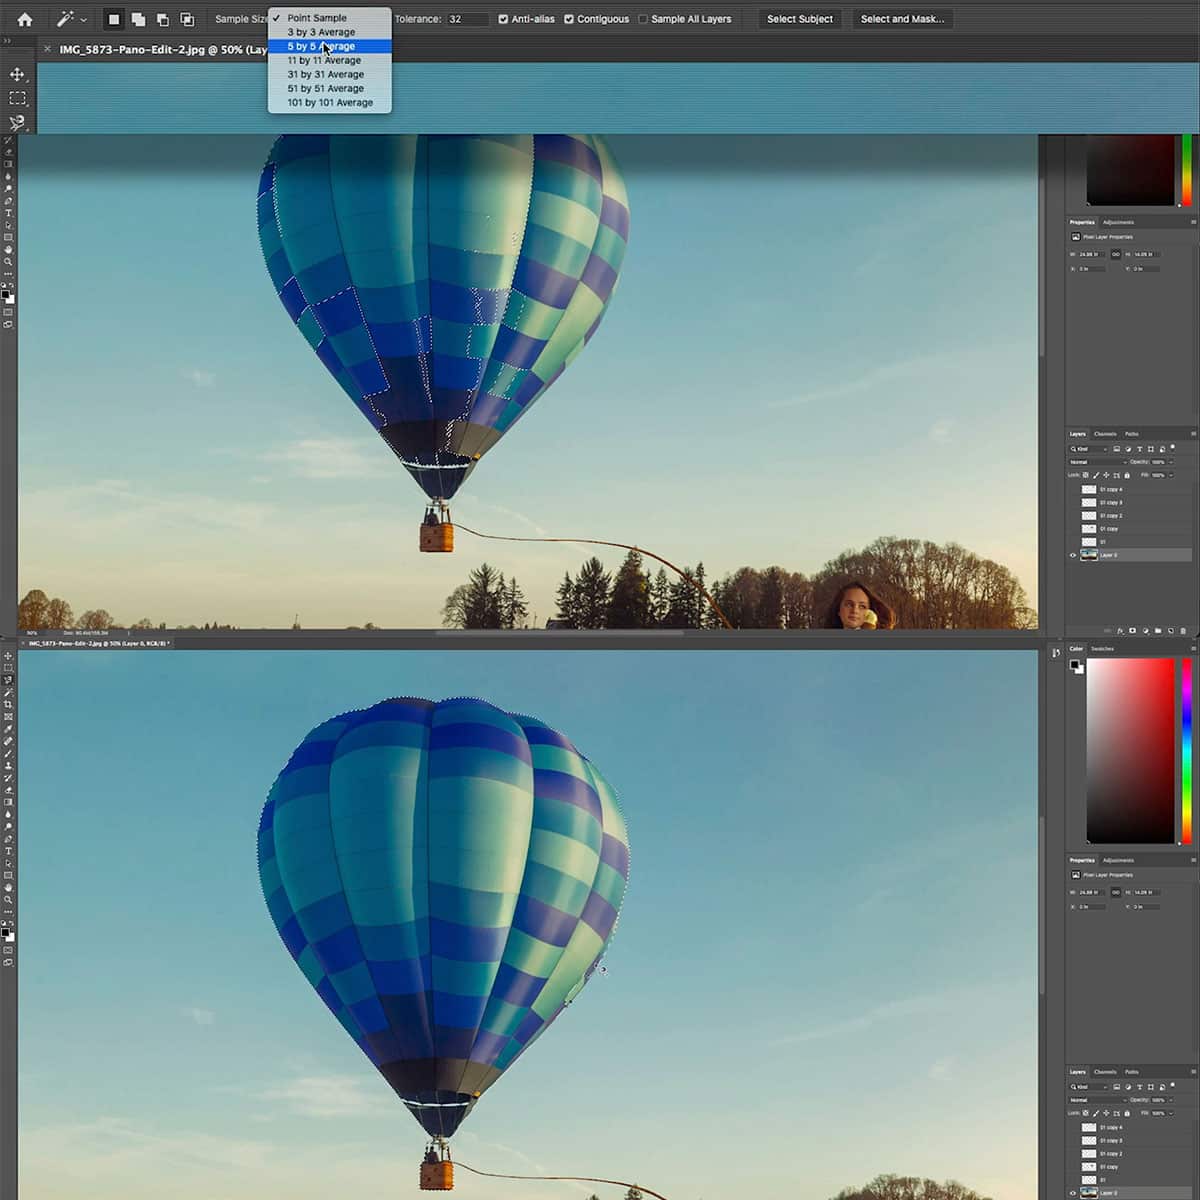 Commercial Retouching In Photoshop Tutorial With Sef McCullough Sef McCullough PRO EDU